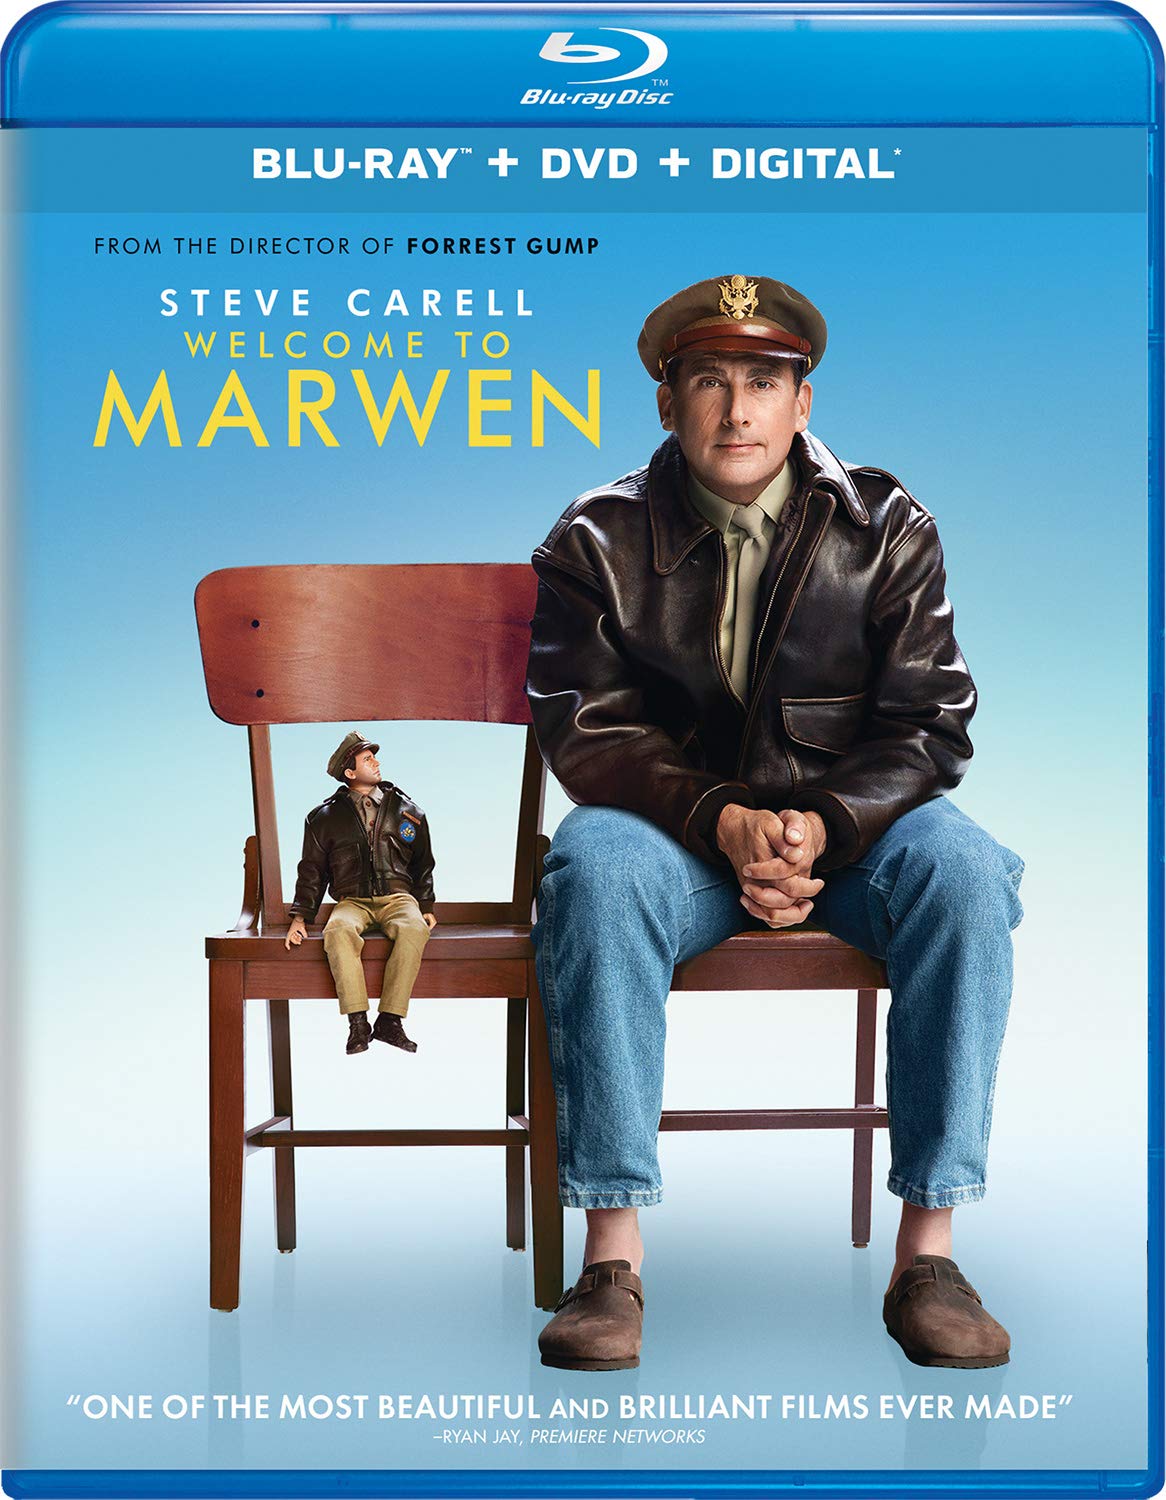 Welcome to Marwen DVD Release Date April 9, 2019